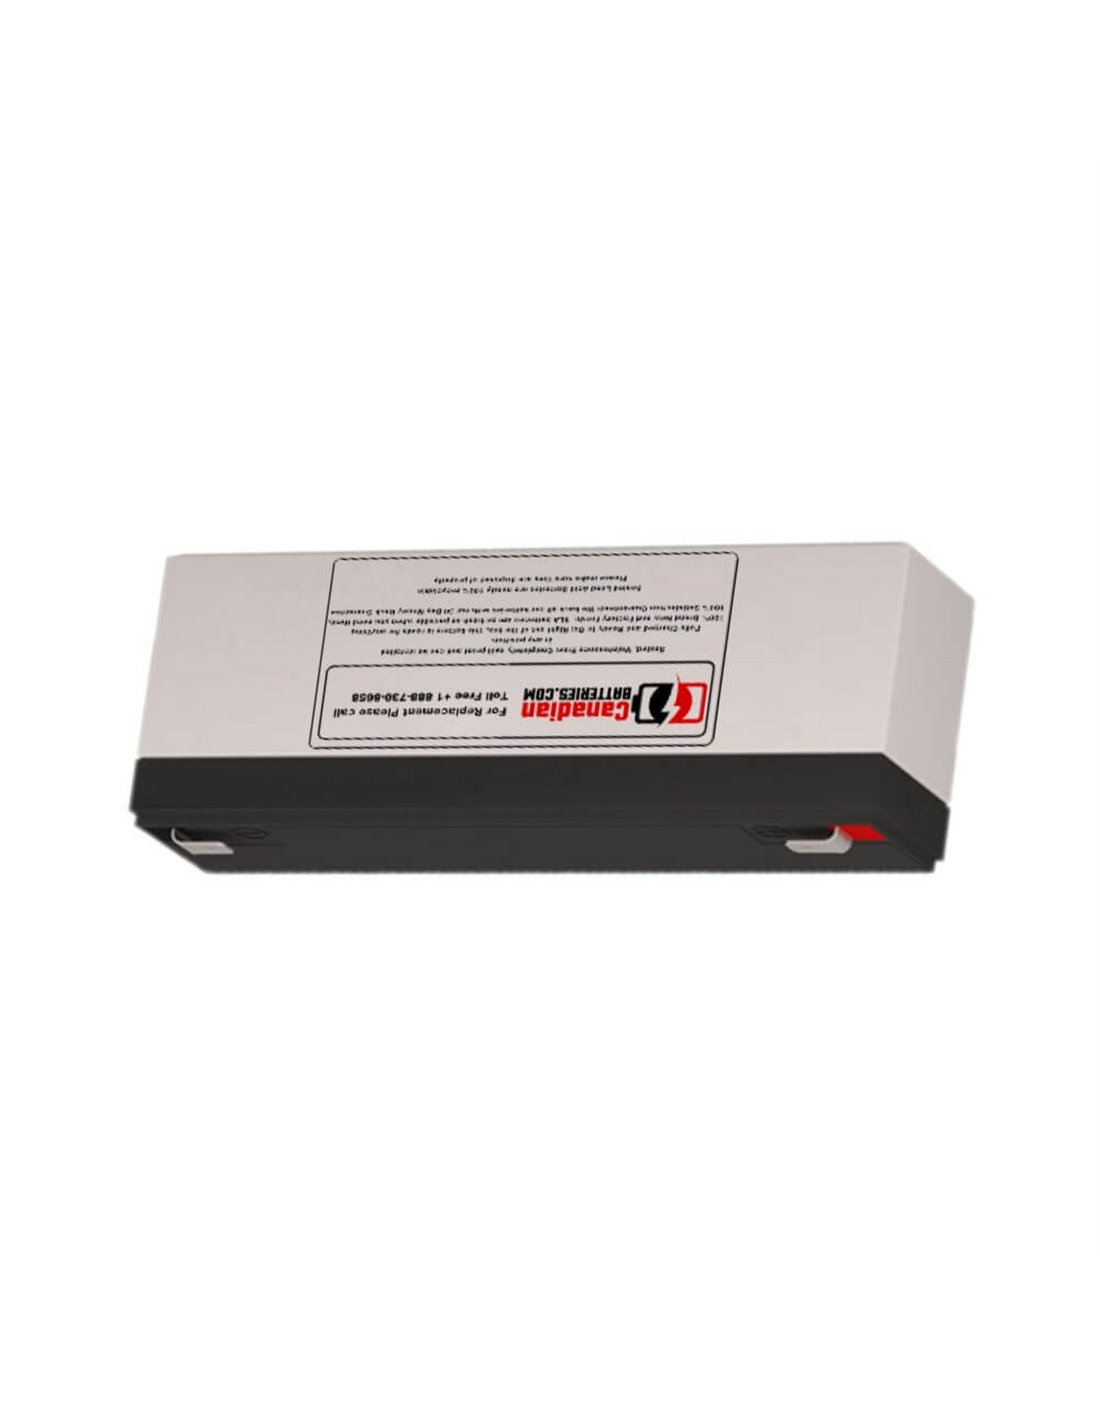 Battery for Intellipower Nd Ps1220l UPS, 1 x 12V, 2.3Ah - 27.6Wh